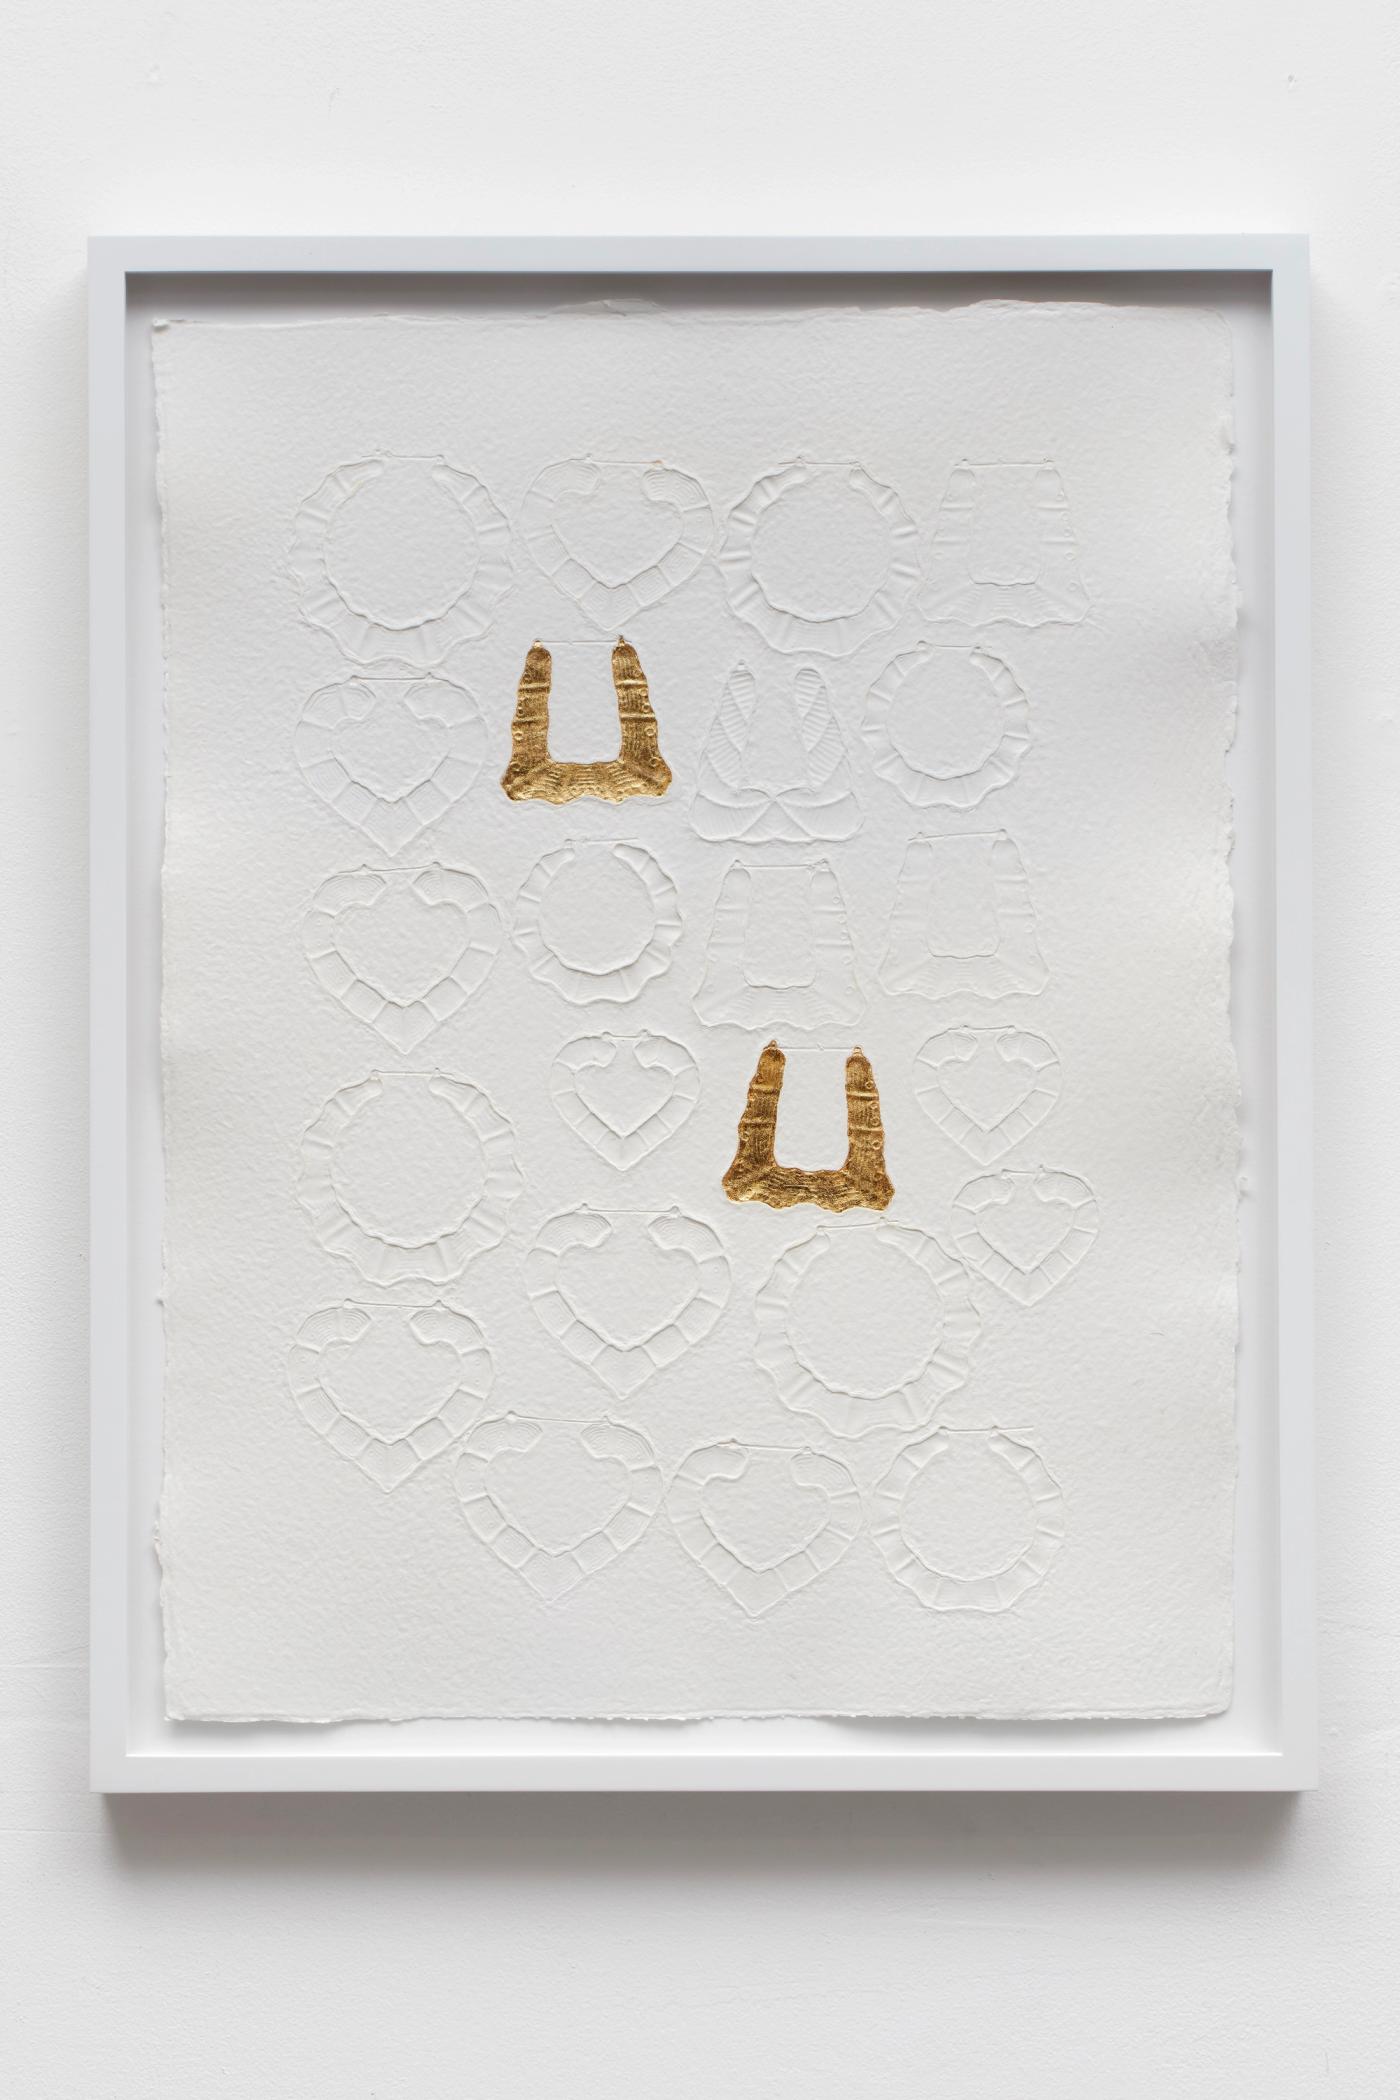 Image of Untitled, 2021: Embossed cotton paper and gold leaf